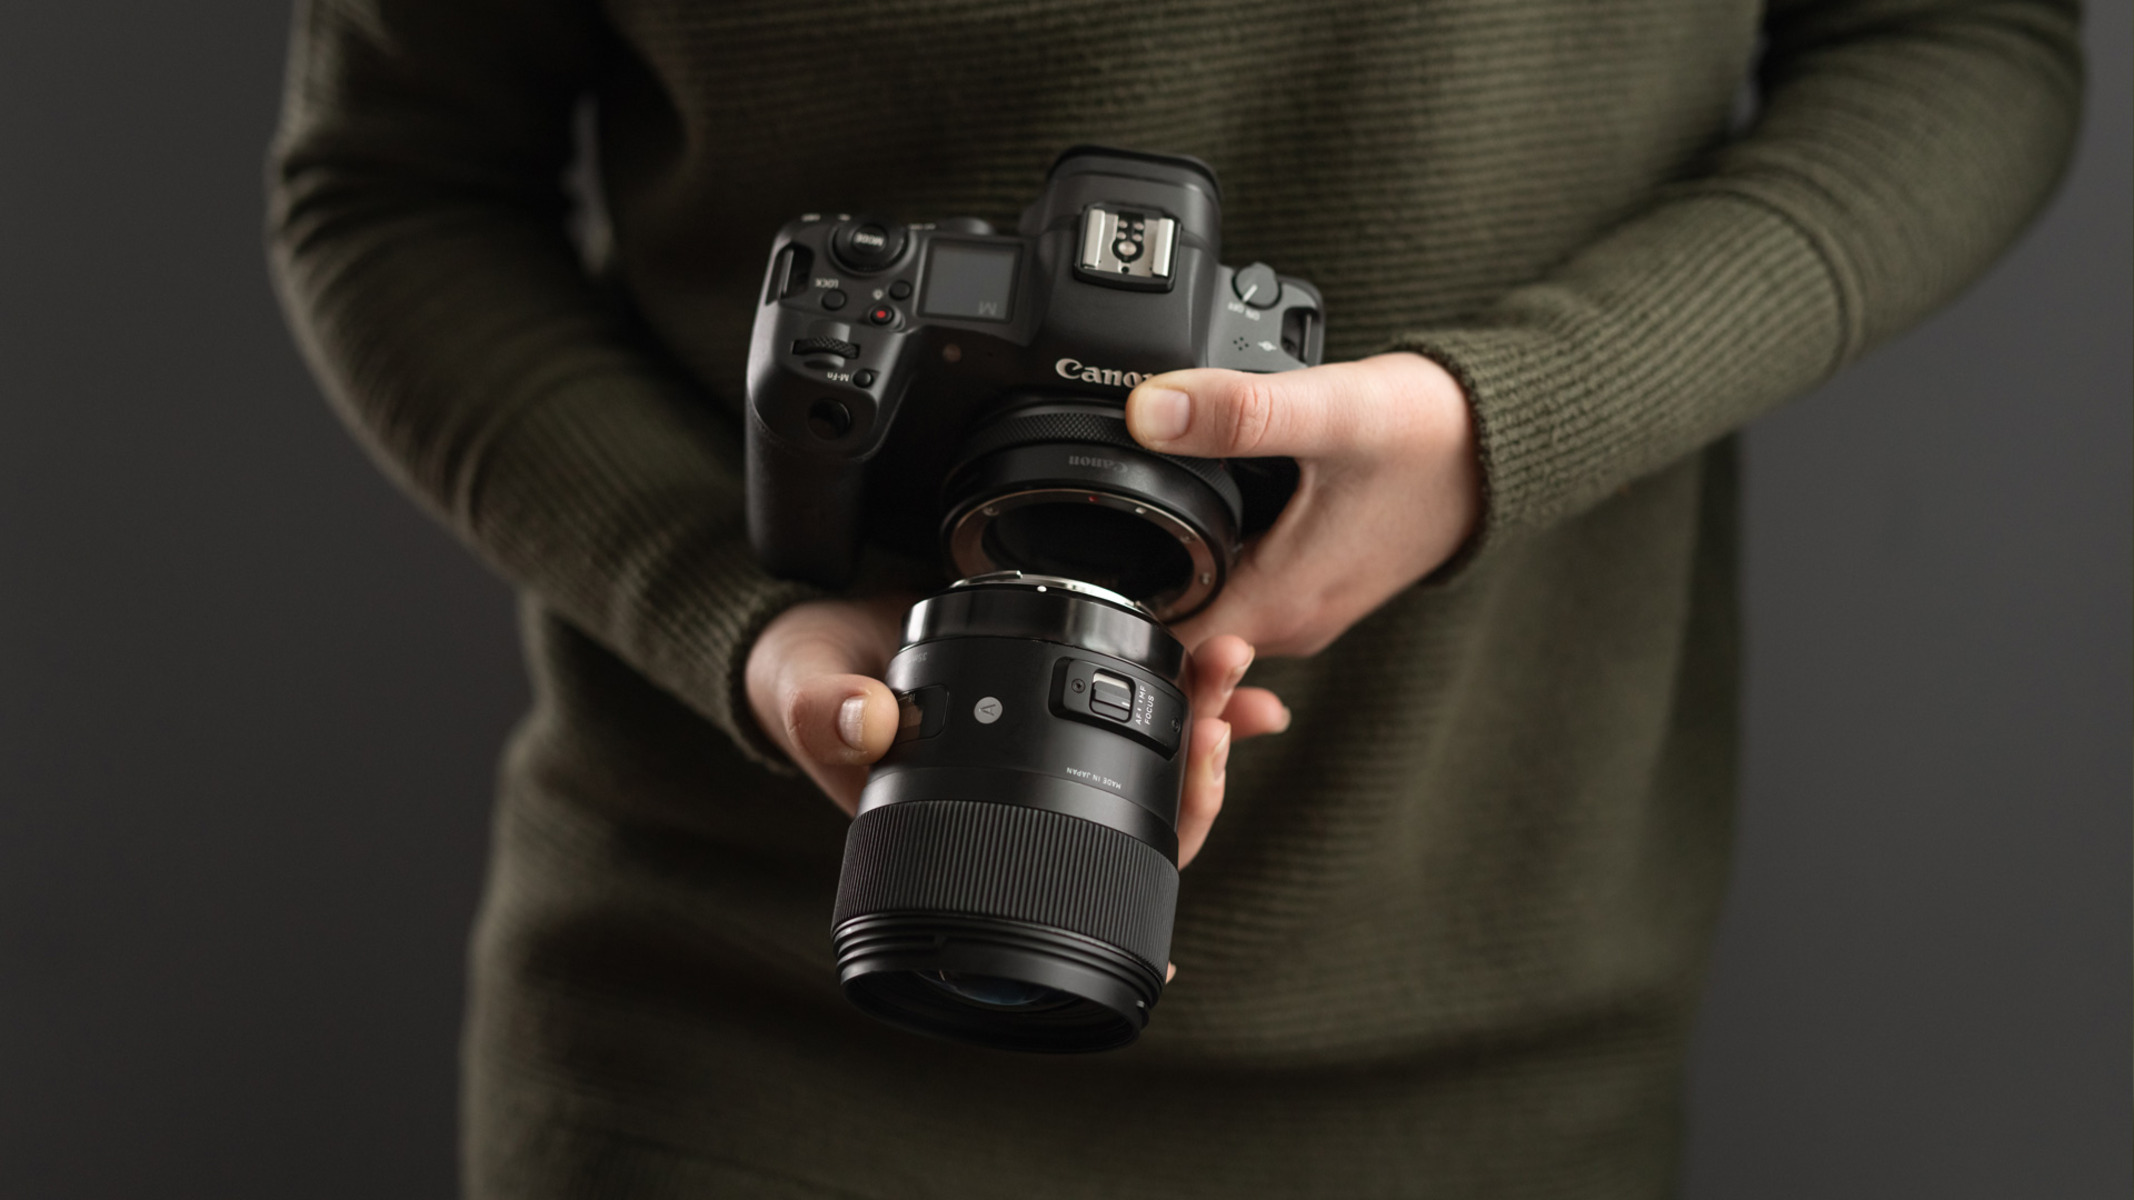 How To Fit DSLR Lens On A Mirrorless Camera